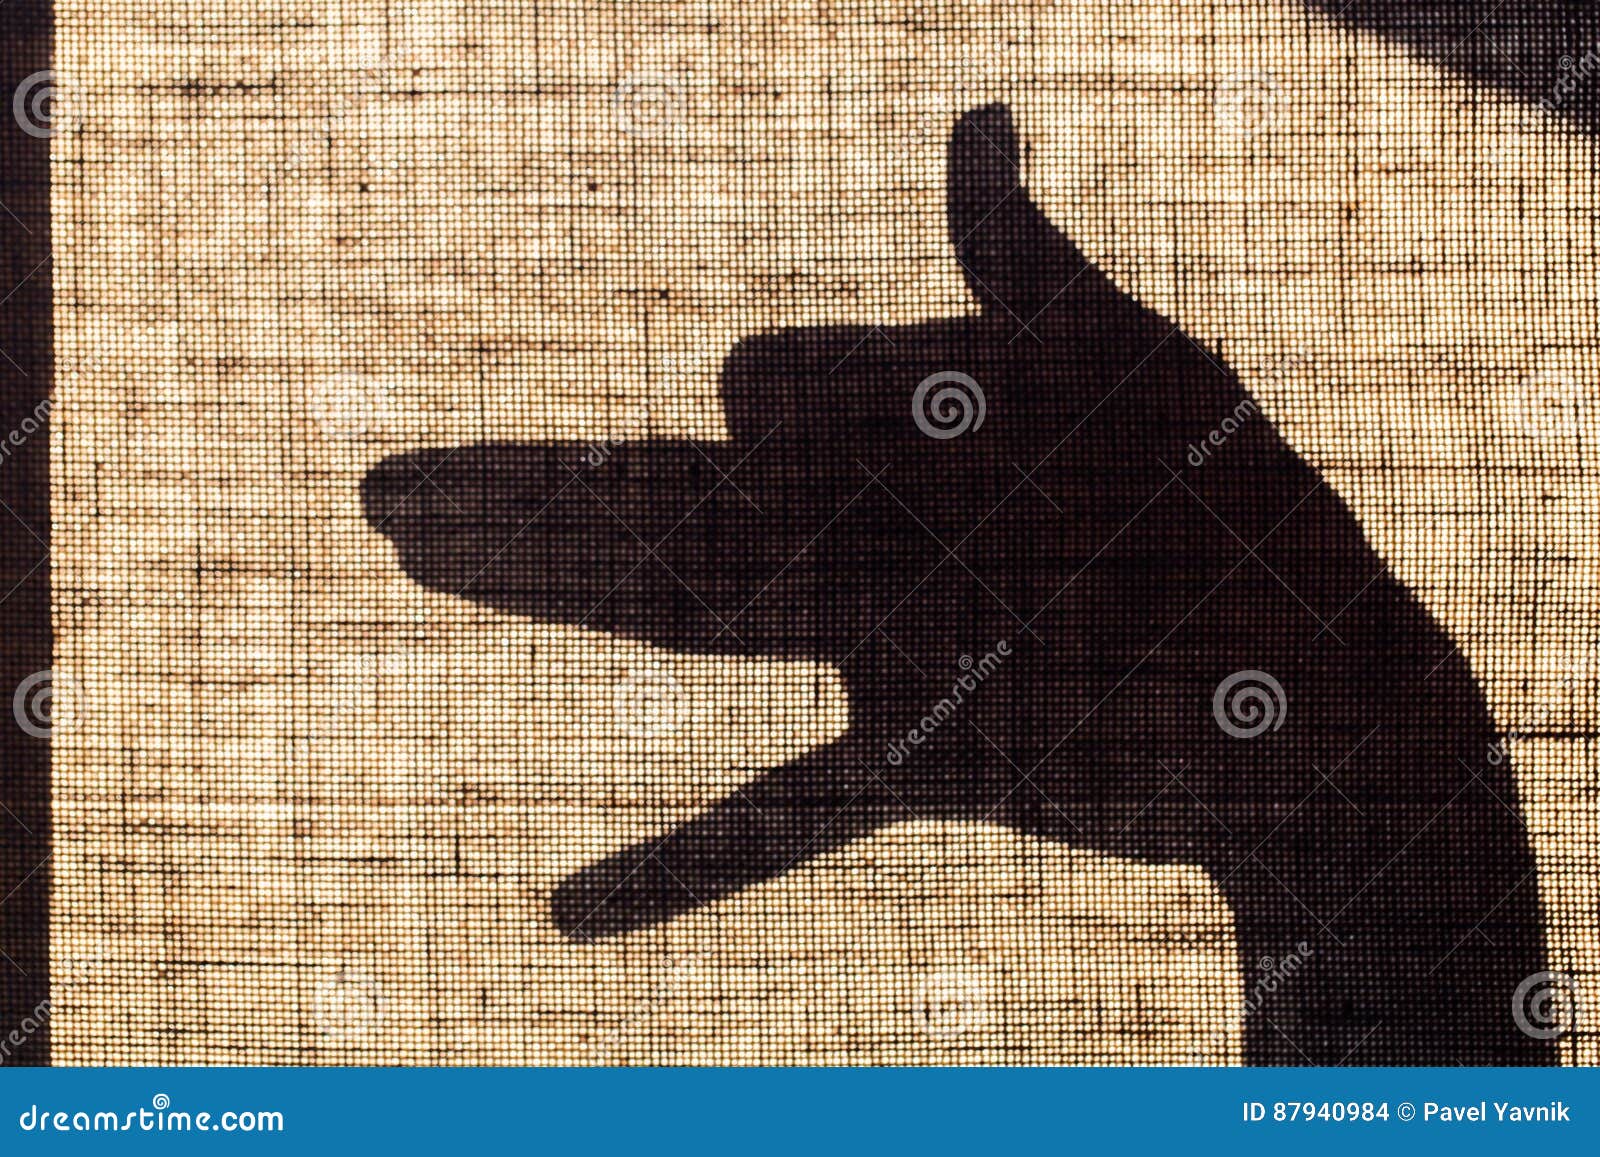 The Shadow of the Hand and Fingers in the Form of a Dog Shaped Mark on Flax  Canvas. Stock Photo - Image of action, imagination: 87940984